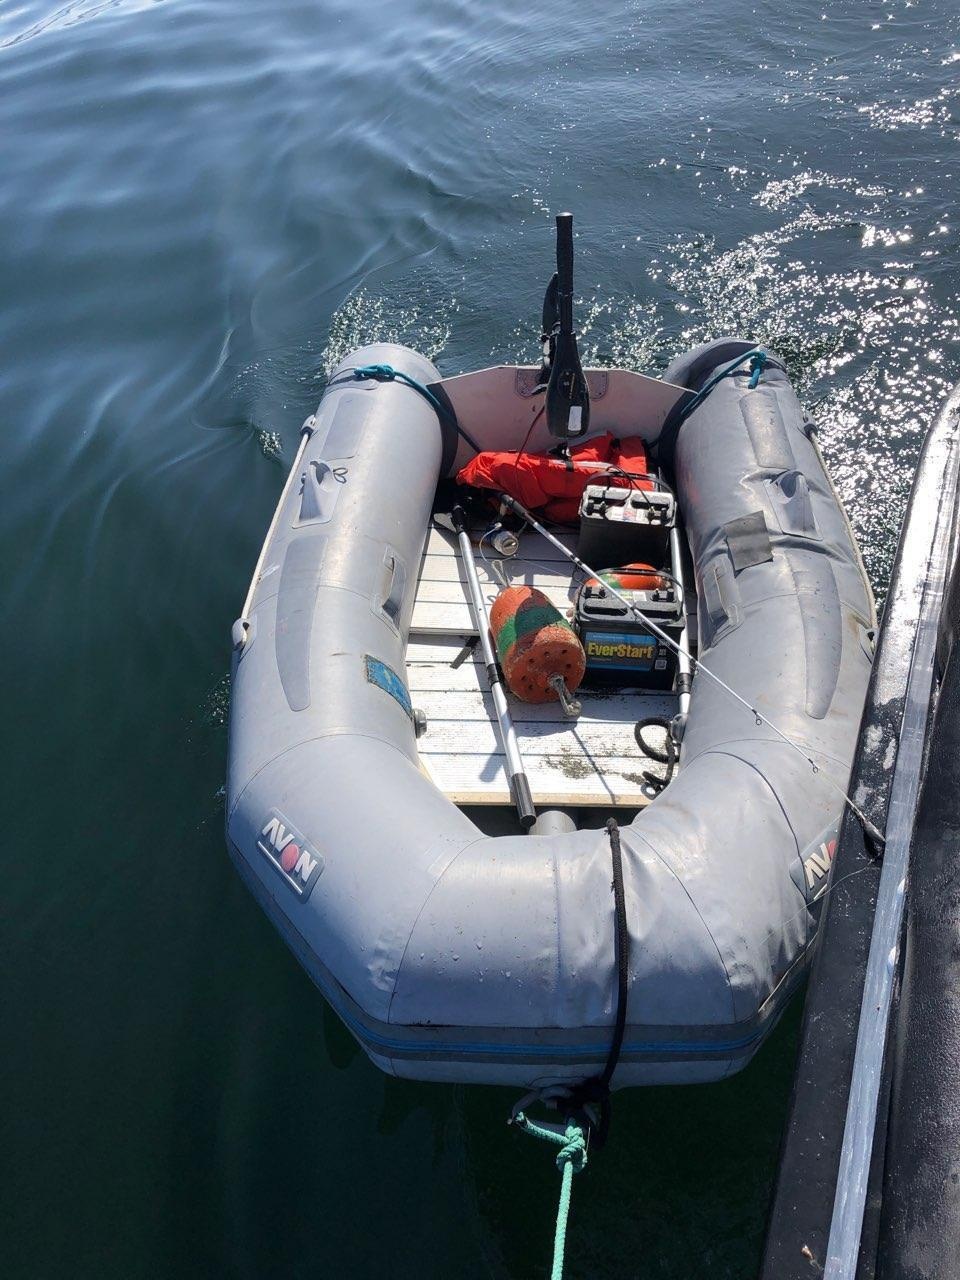 Coast Guard searching for owner of unmanned, adrift vessel west of Crescent City, California